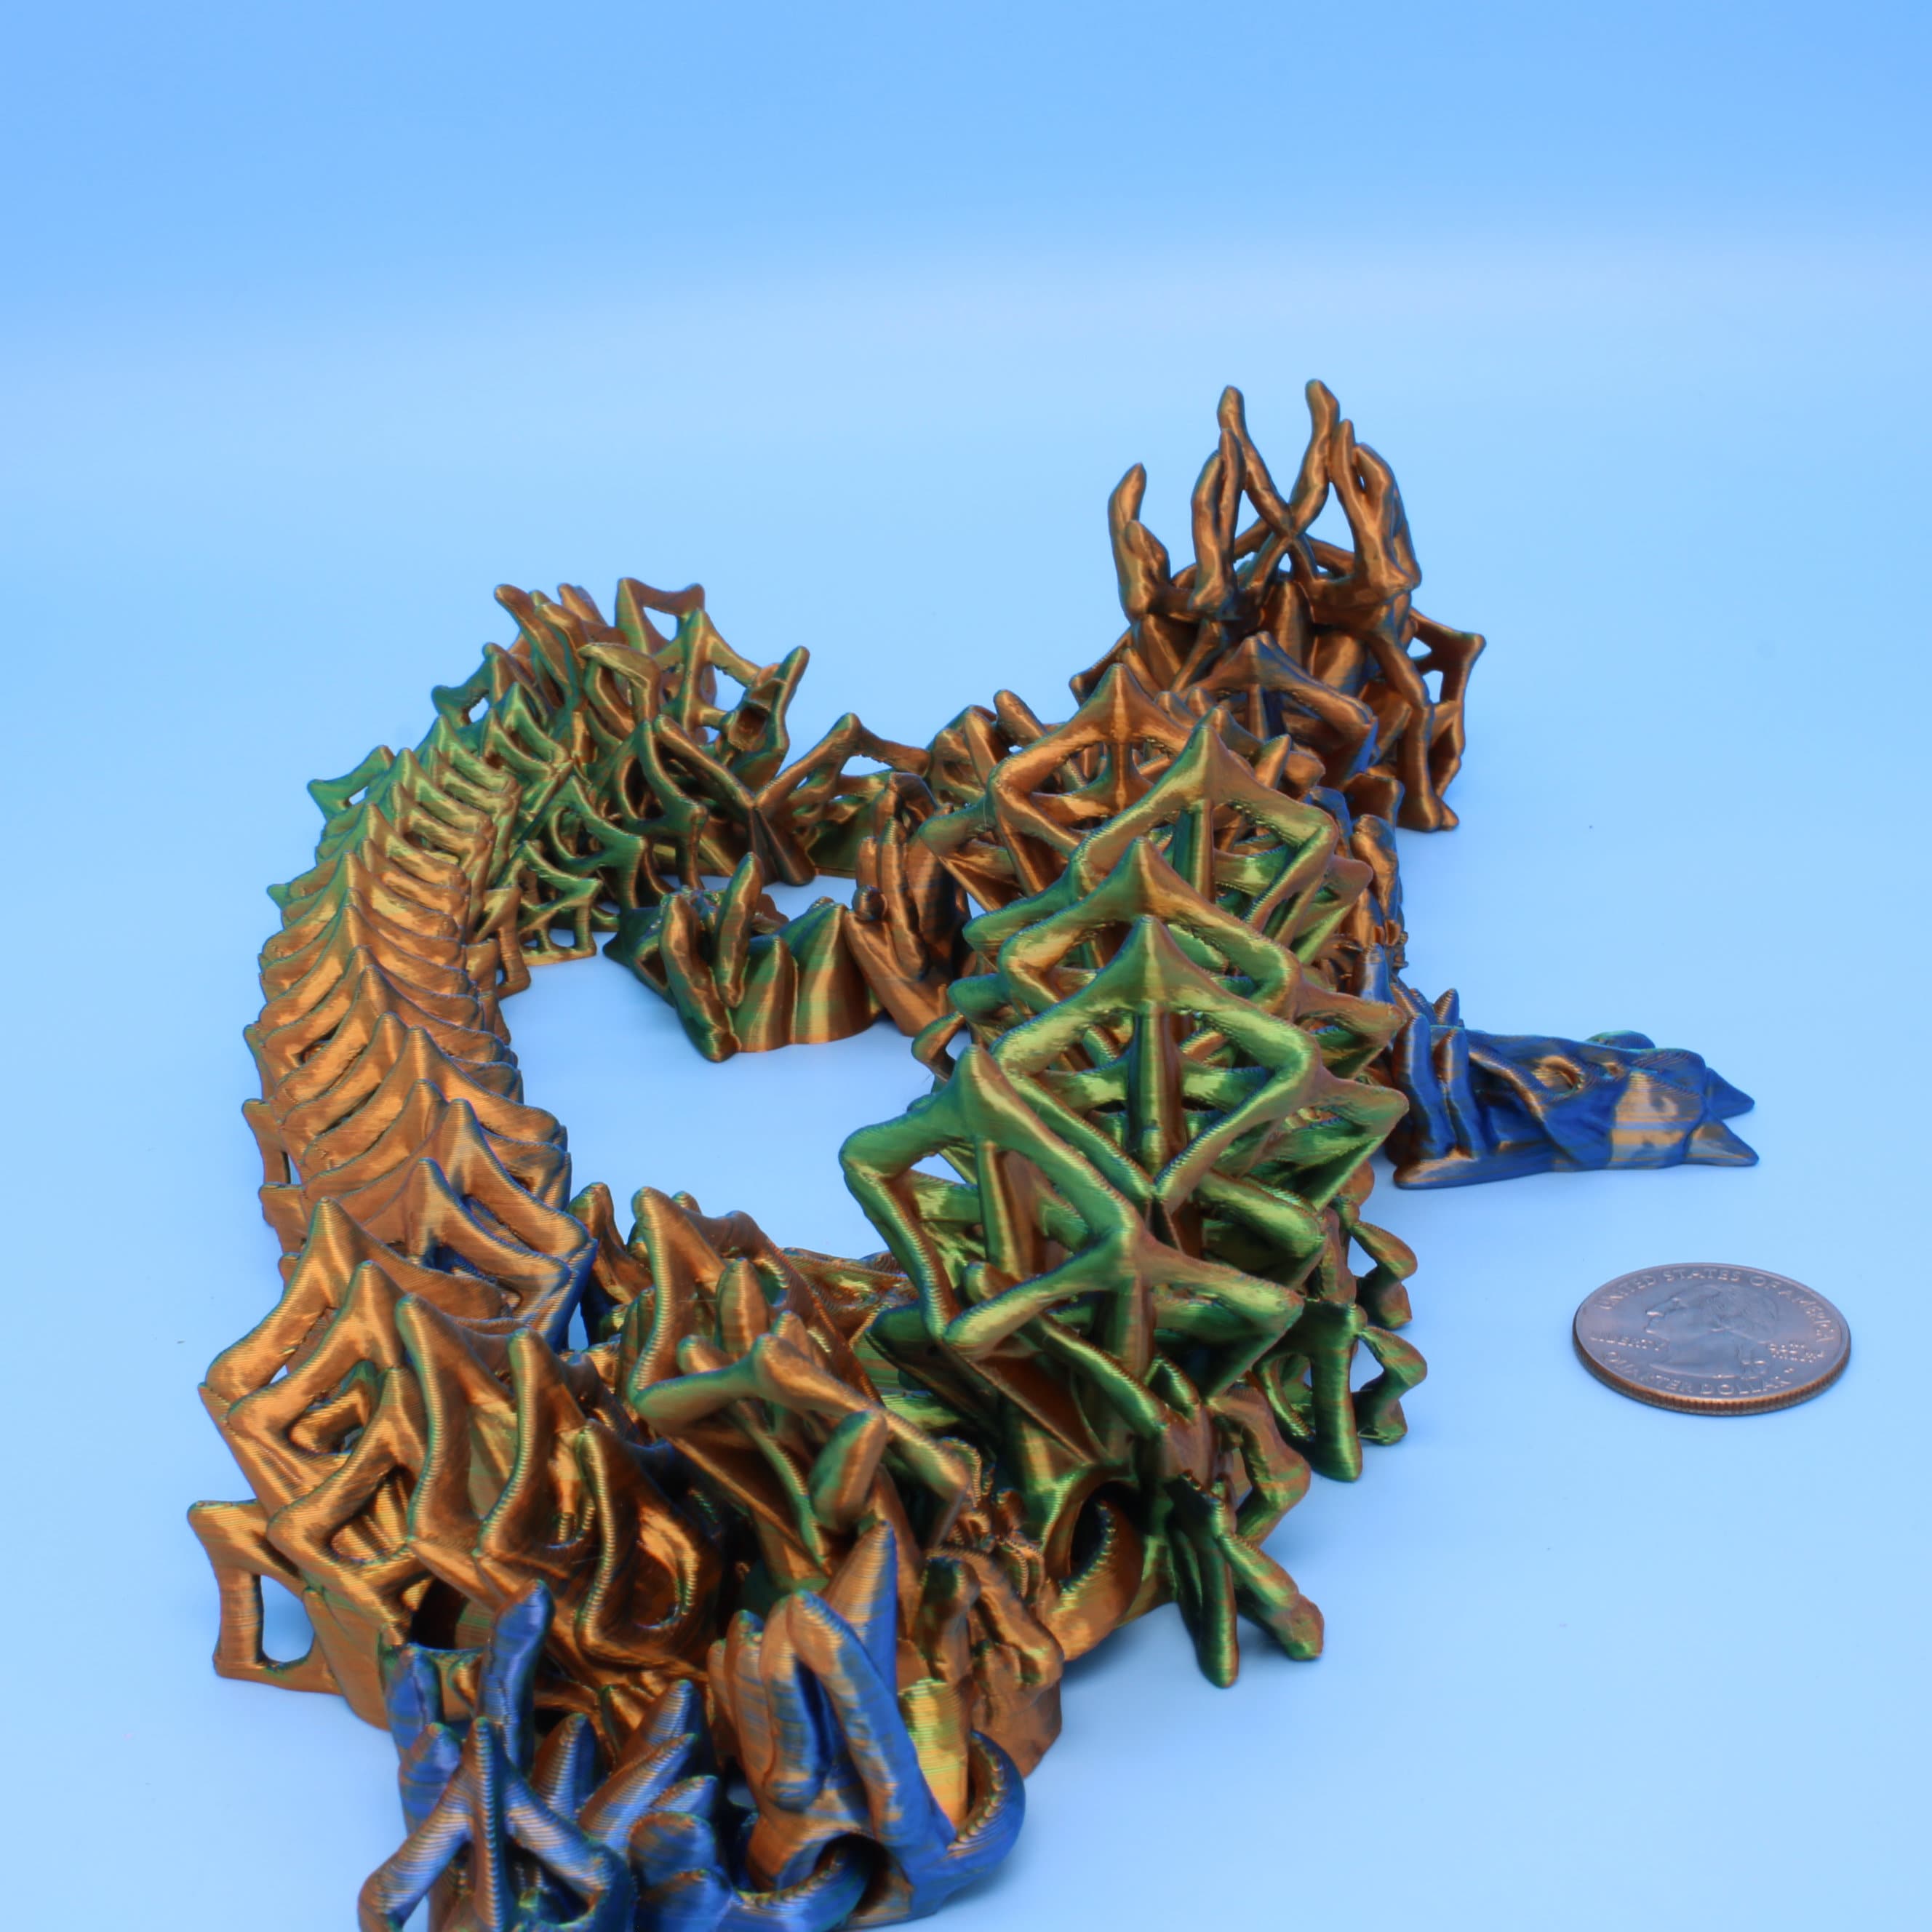 Wicked Dragon | 3D printed | Articulating Dragon | 19.5 in.